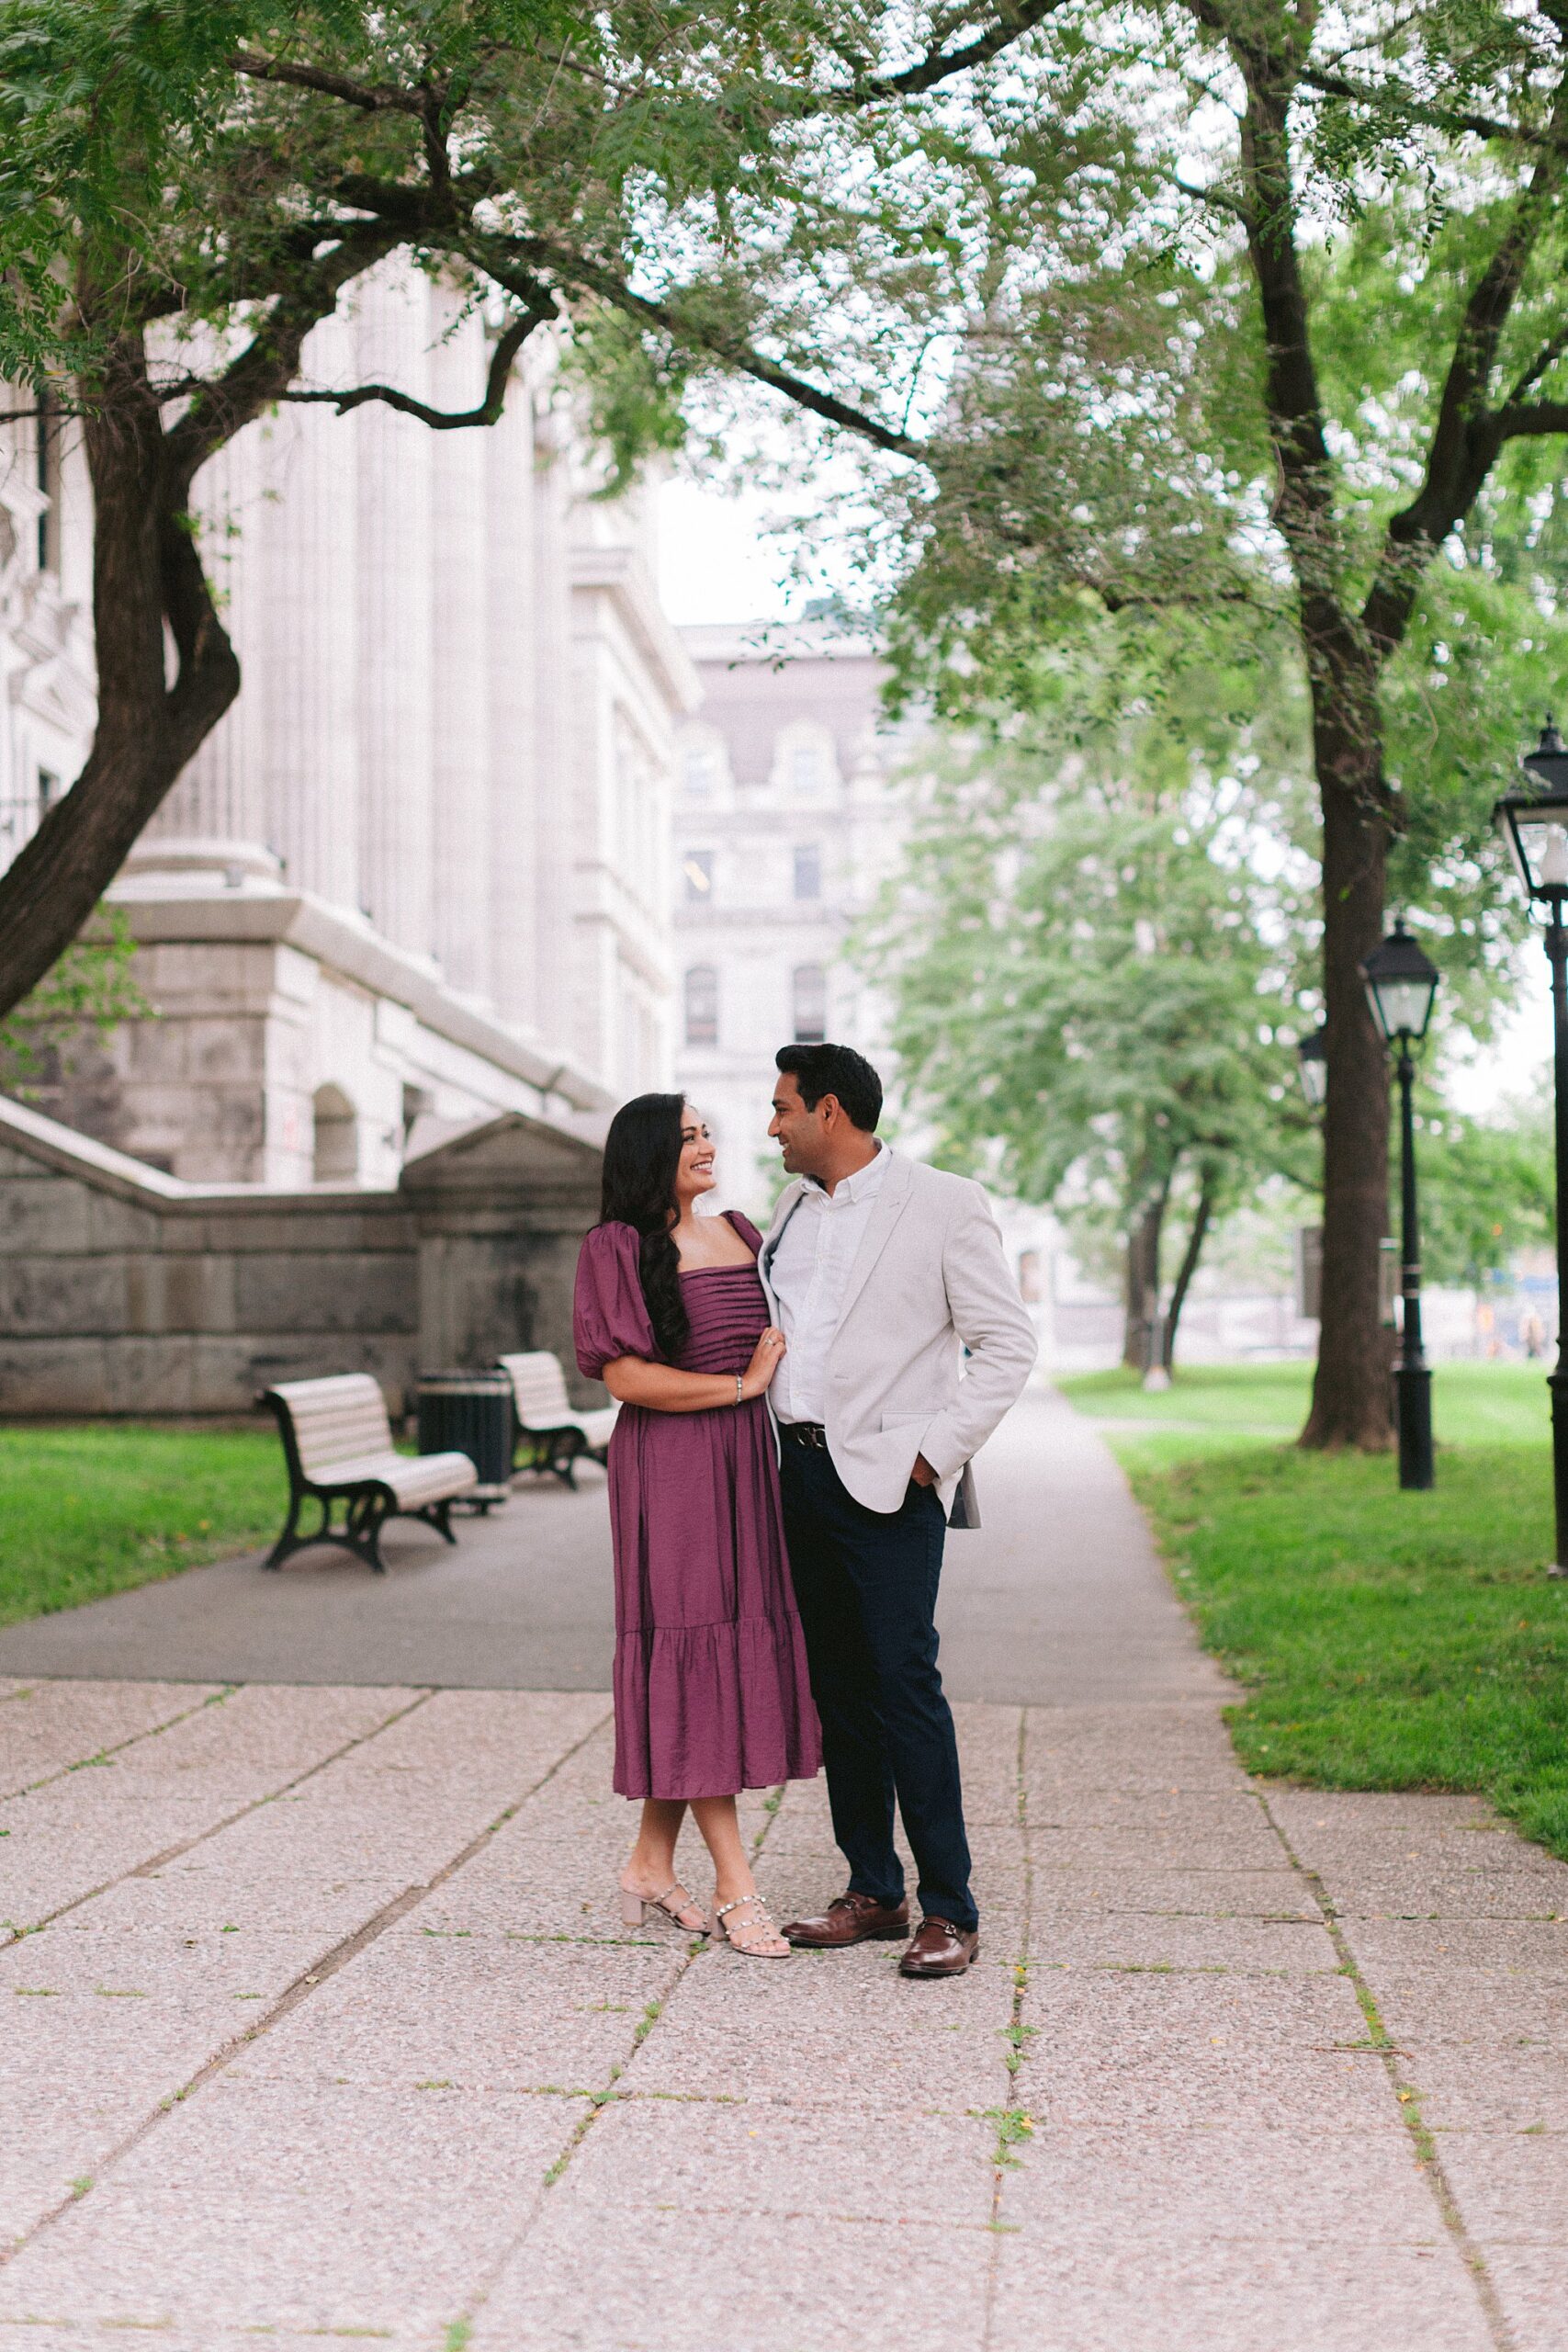 Capturing love in the heart of Montreal